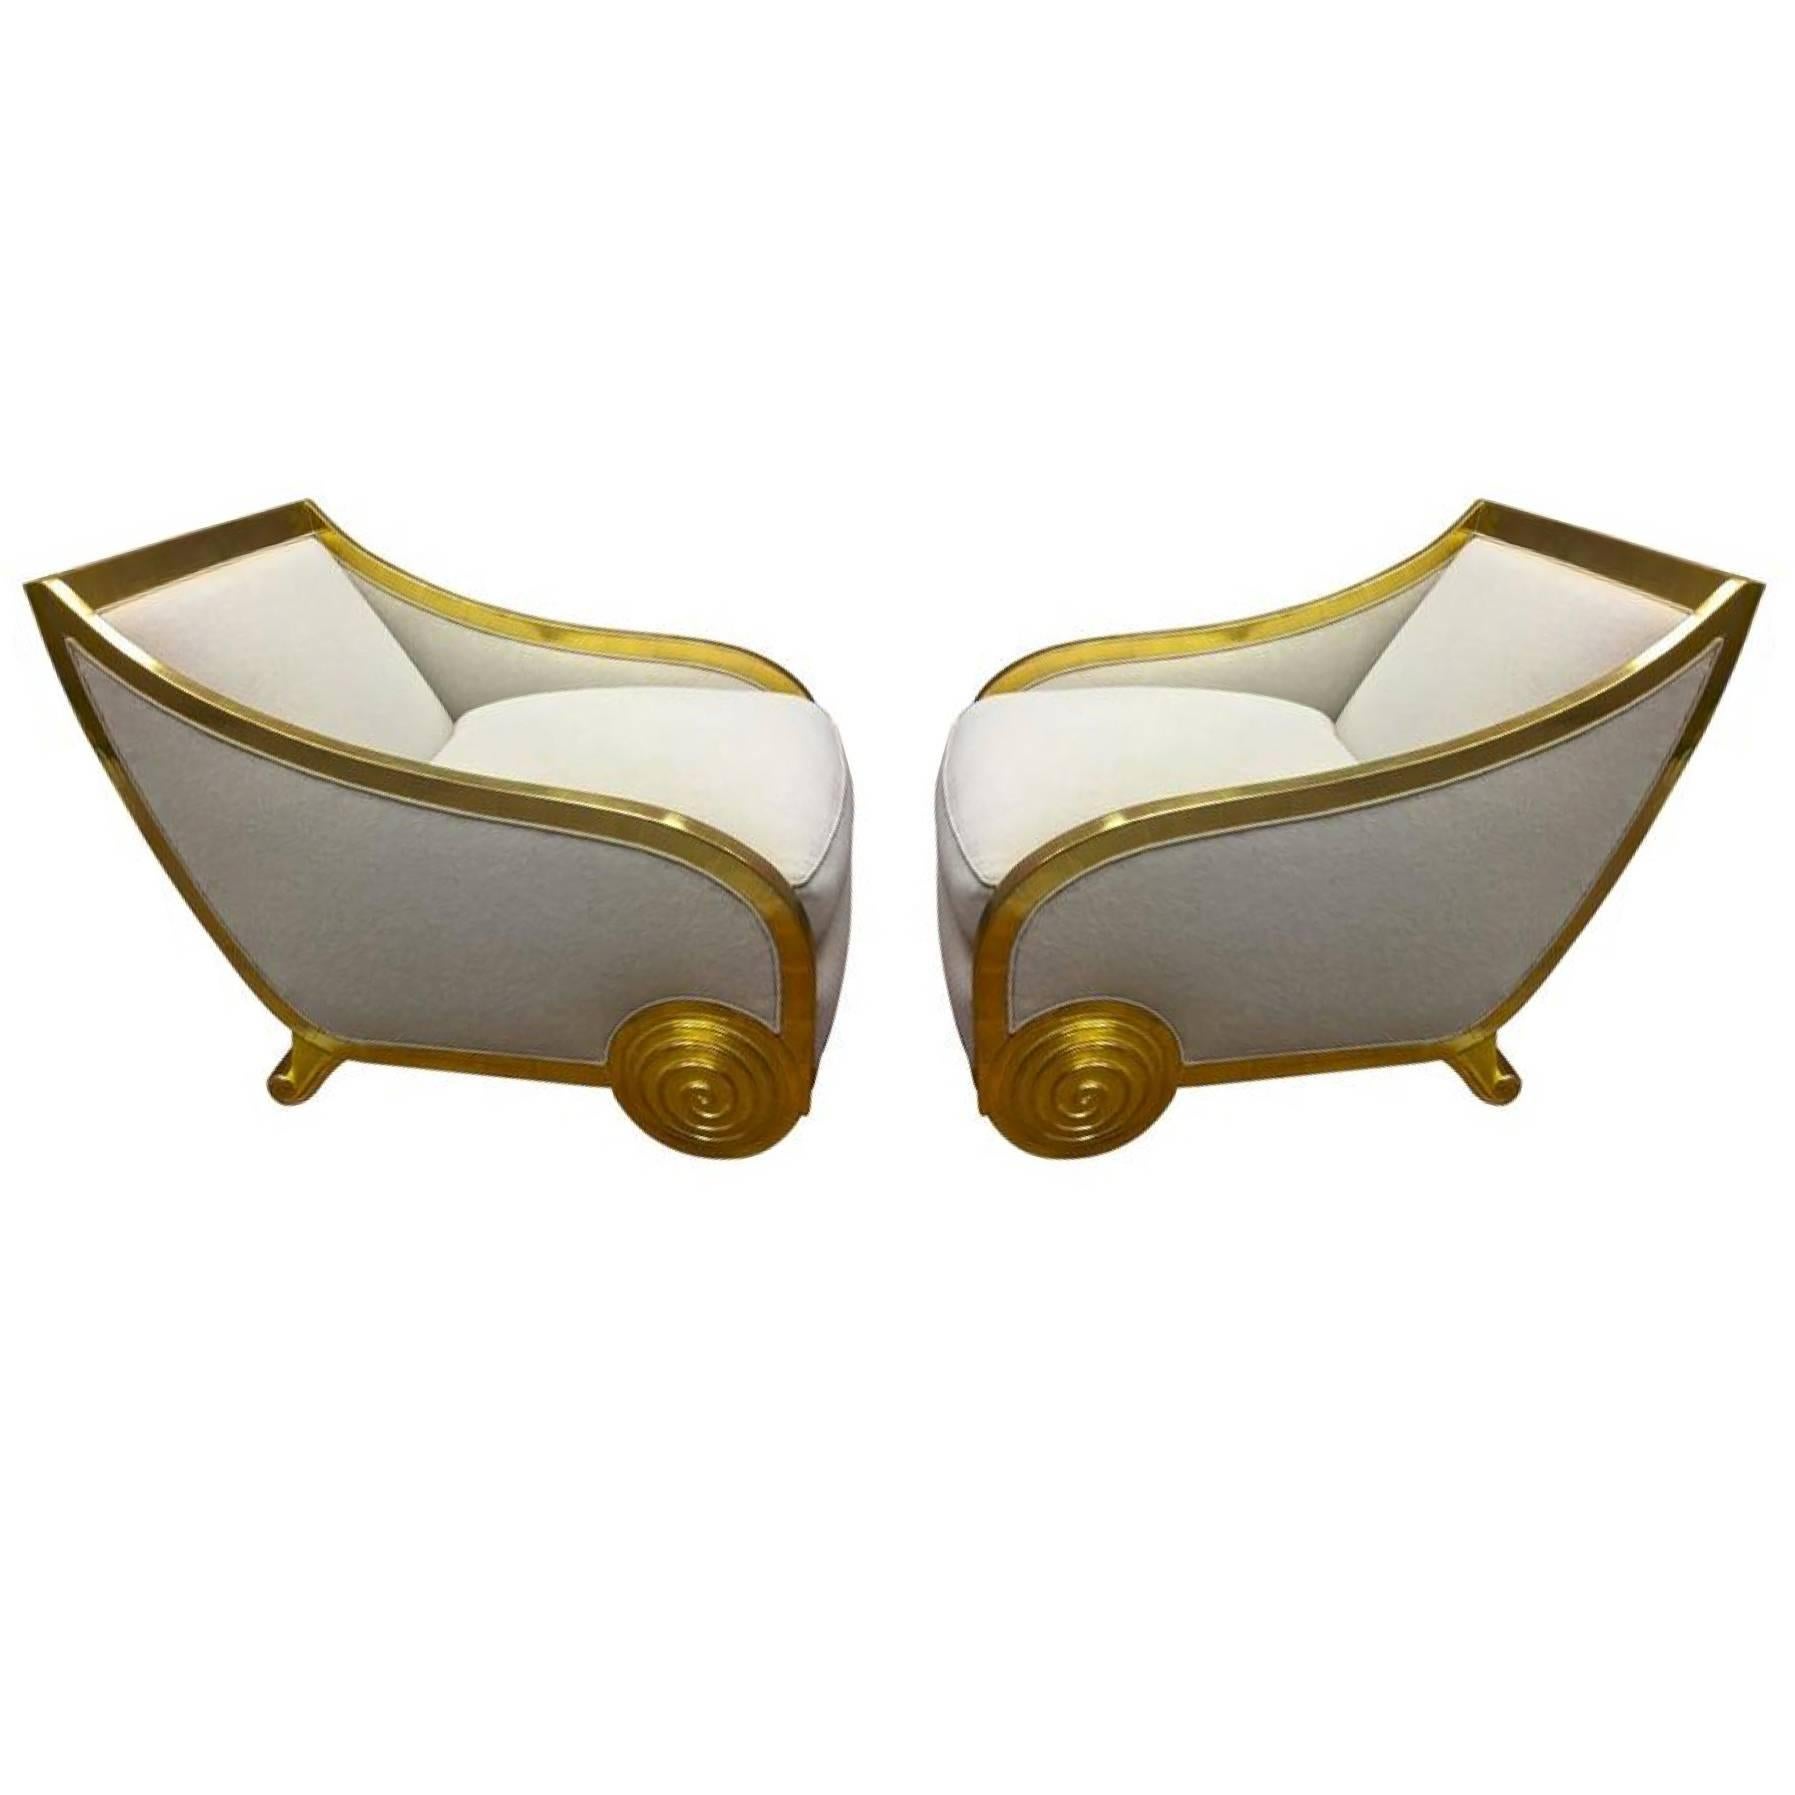 Paul Iribe Attributed Chicest Pair of Gold Leaf Art Deco Slipper Chairs For Sale